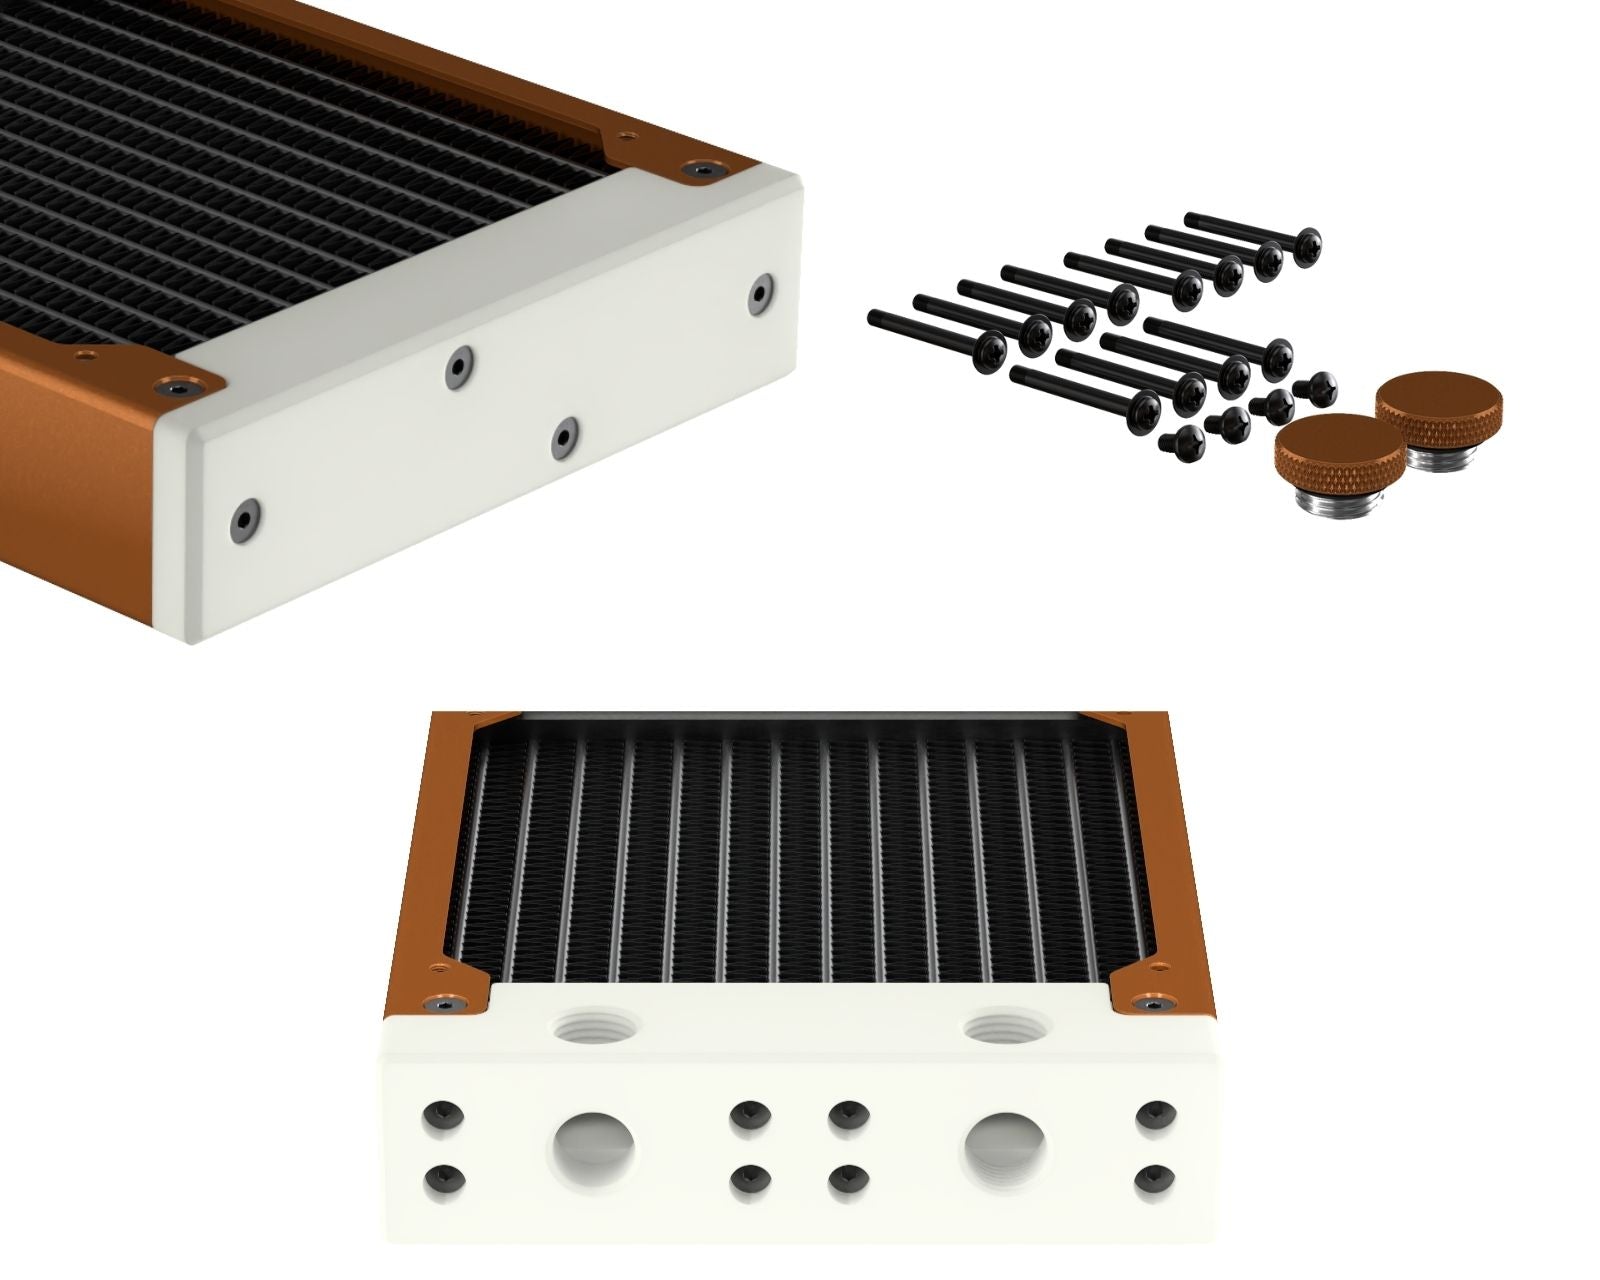 PrimoChill 360SL (30mm) EXIMO Modular Radiator, White POM, 3x120mm, Triple Fan (R-SL-W36) Available in 20+ Colors, Assembled in USA and Custom Watercooling Loop Ready - Copper